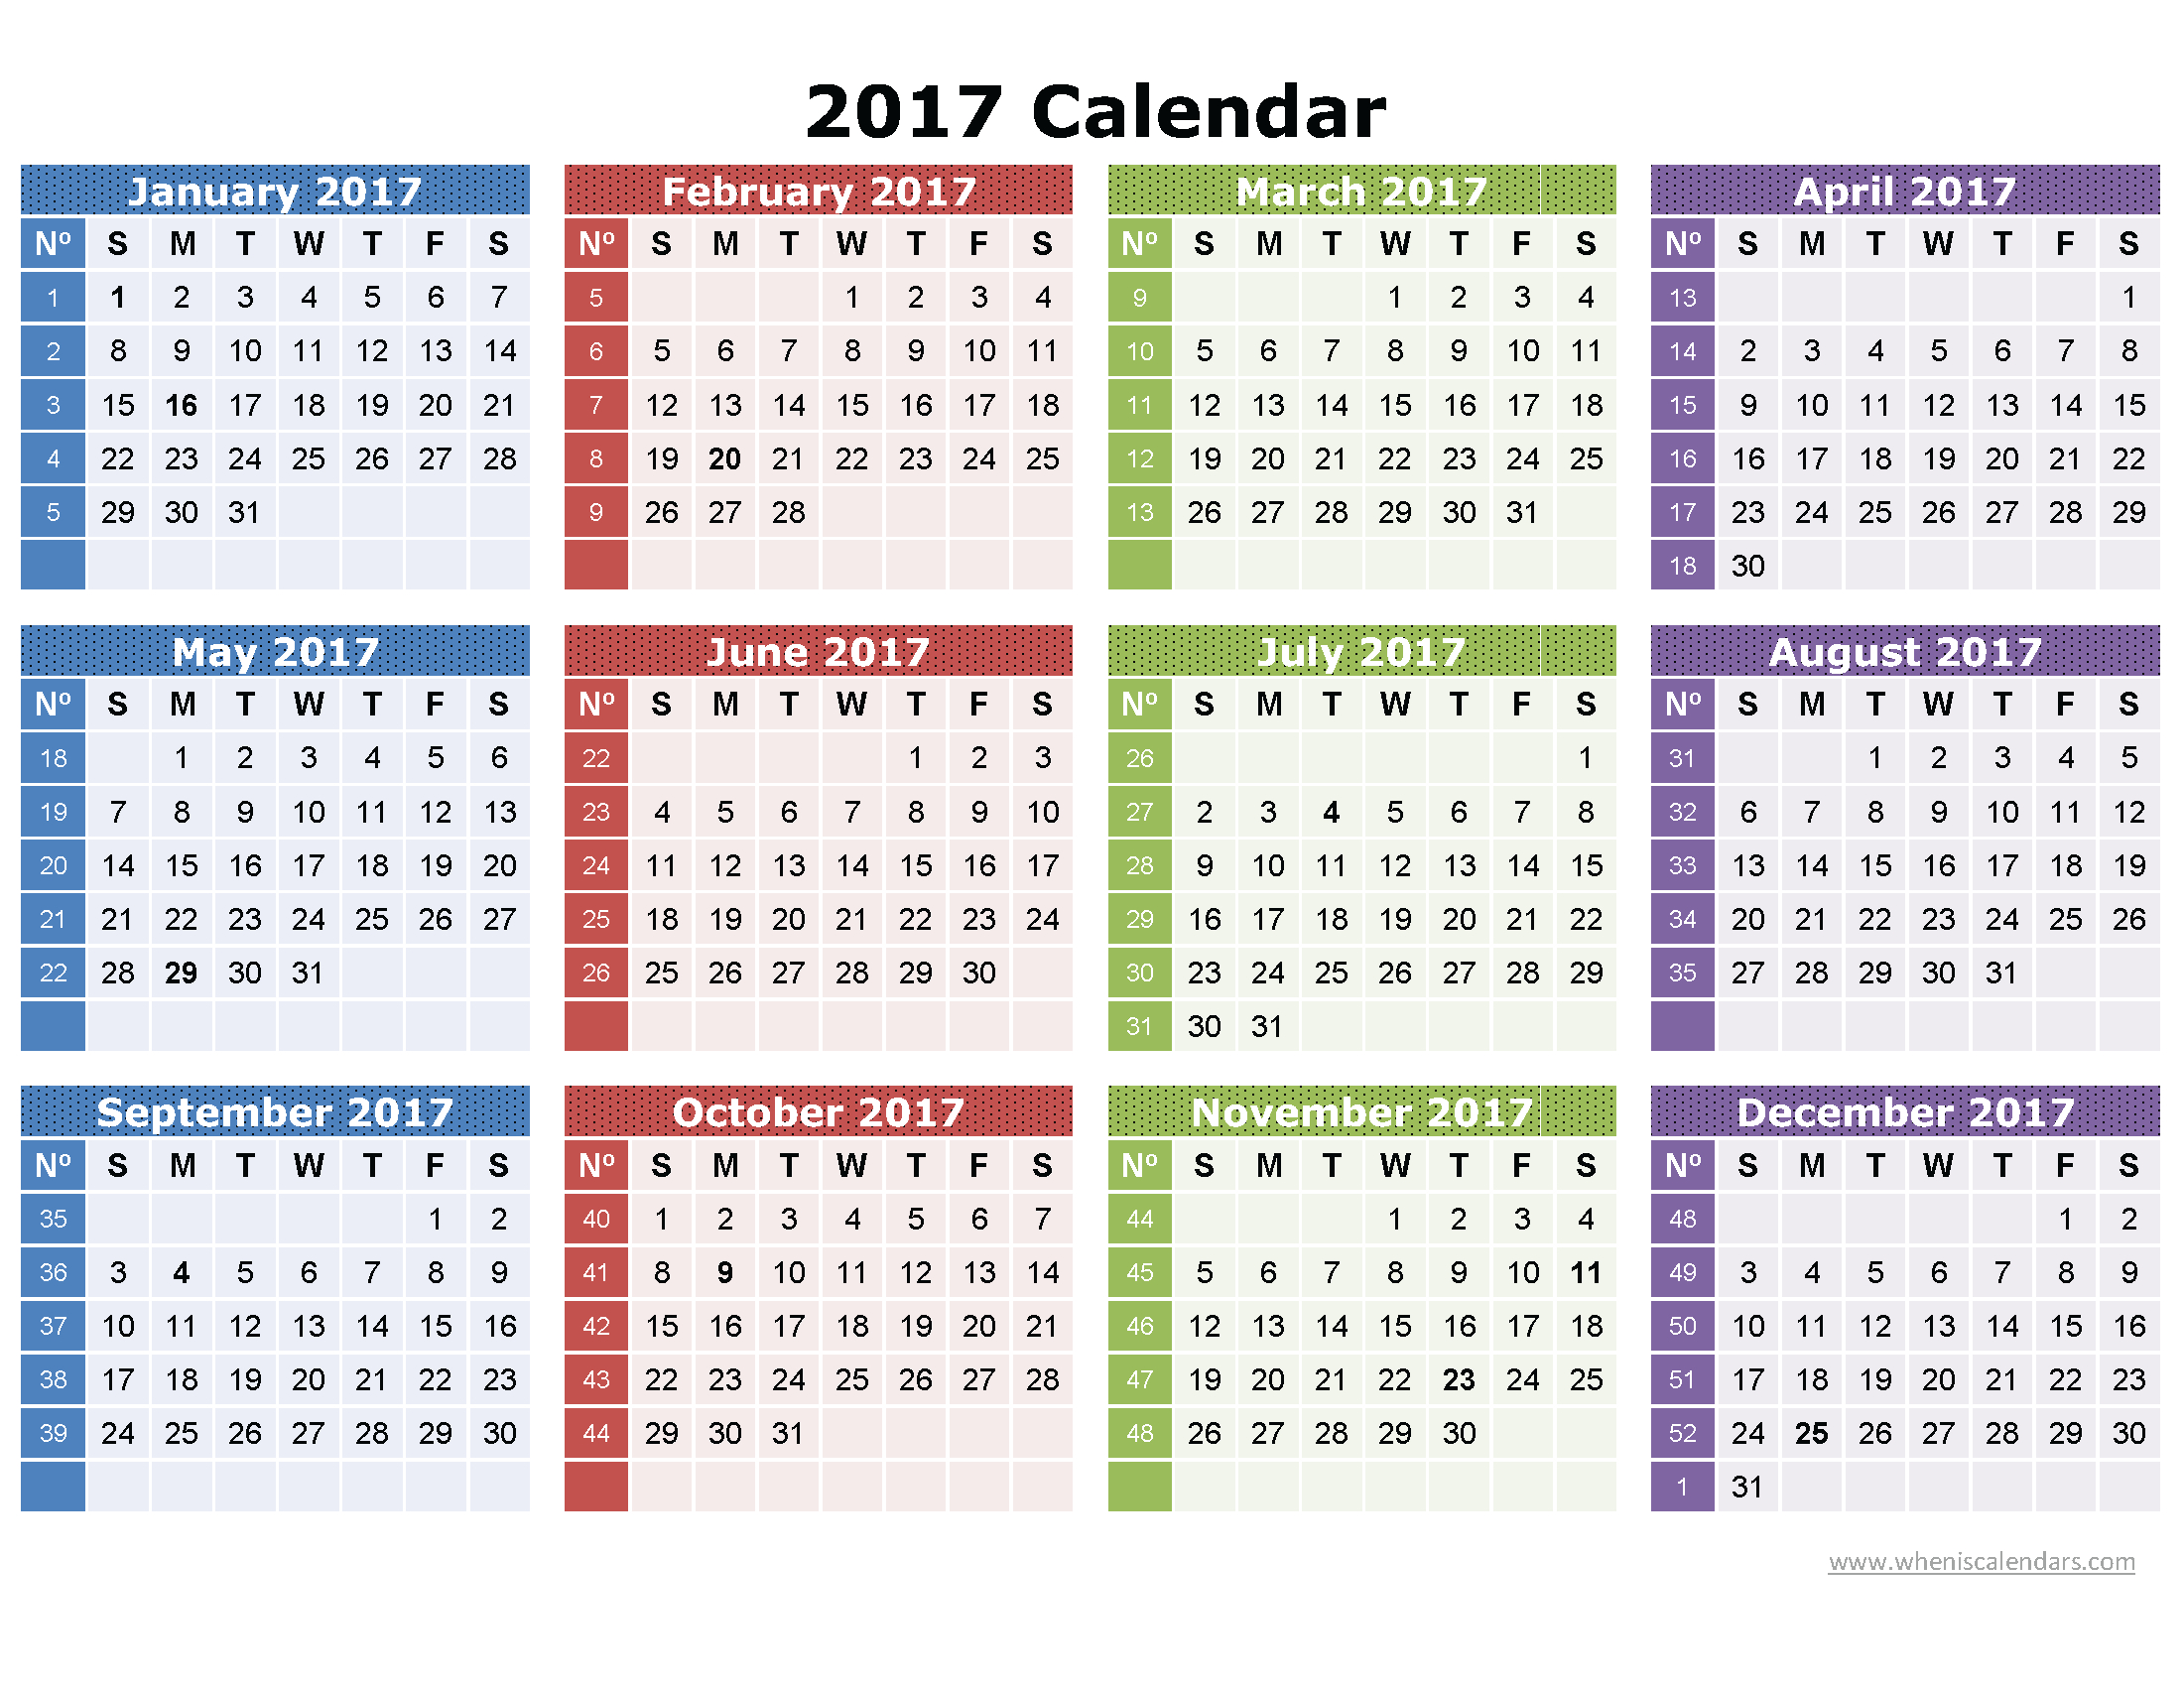 2017 Calendar Printable One Page | Download: Image (Full